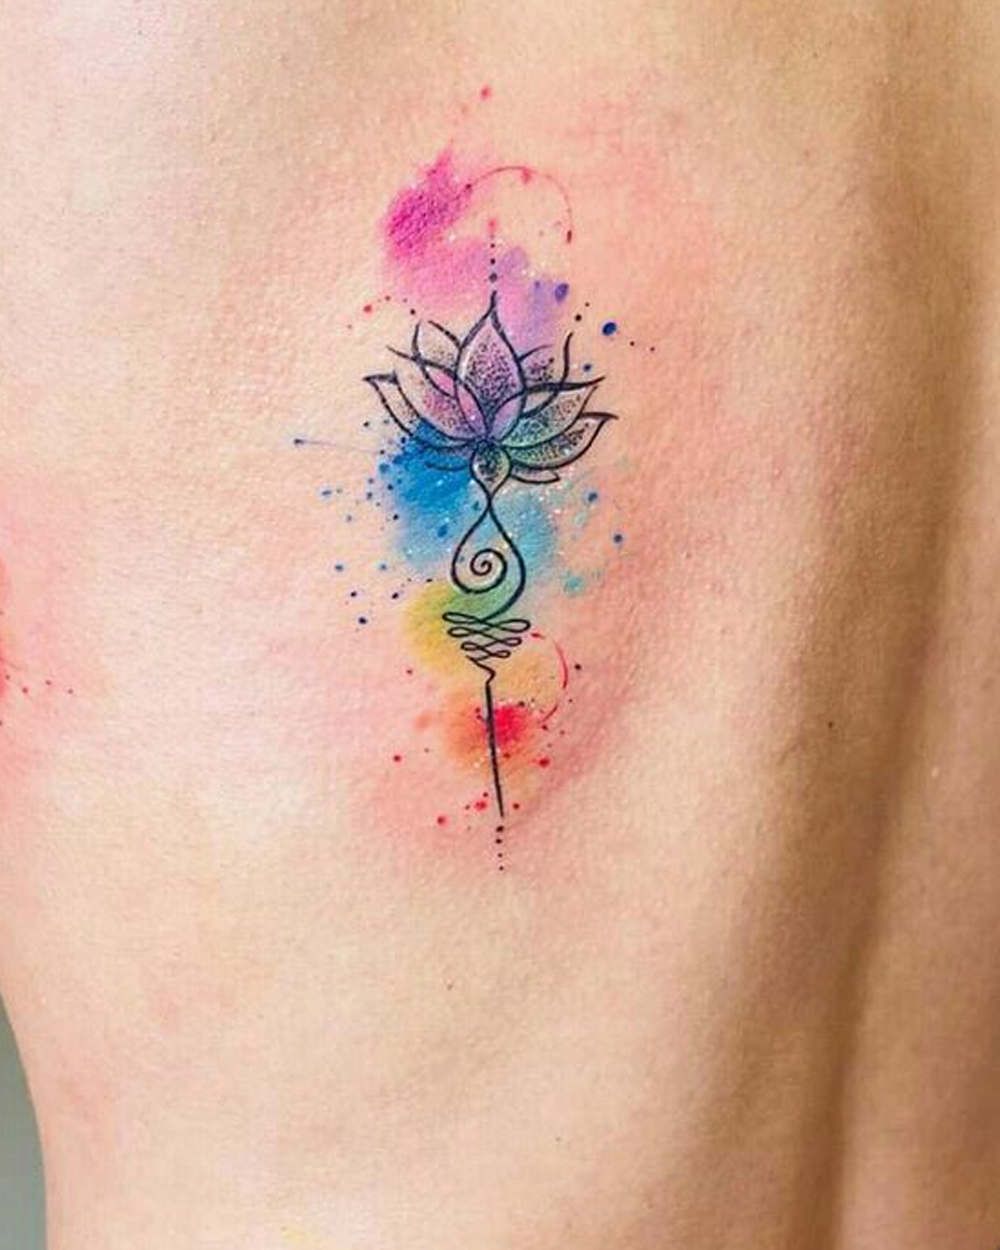 40 Unalome Tattoo Designs Every Girl Will Fall In Love With - Bored Art | Unalome  tattoo, Tattoos for women, Trendy tattoos